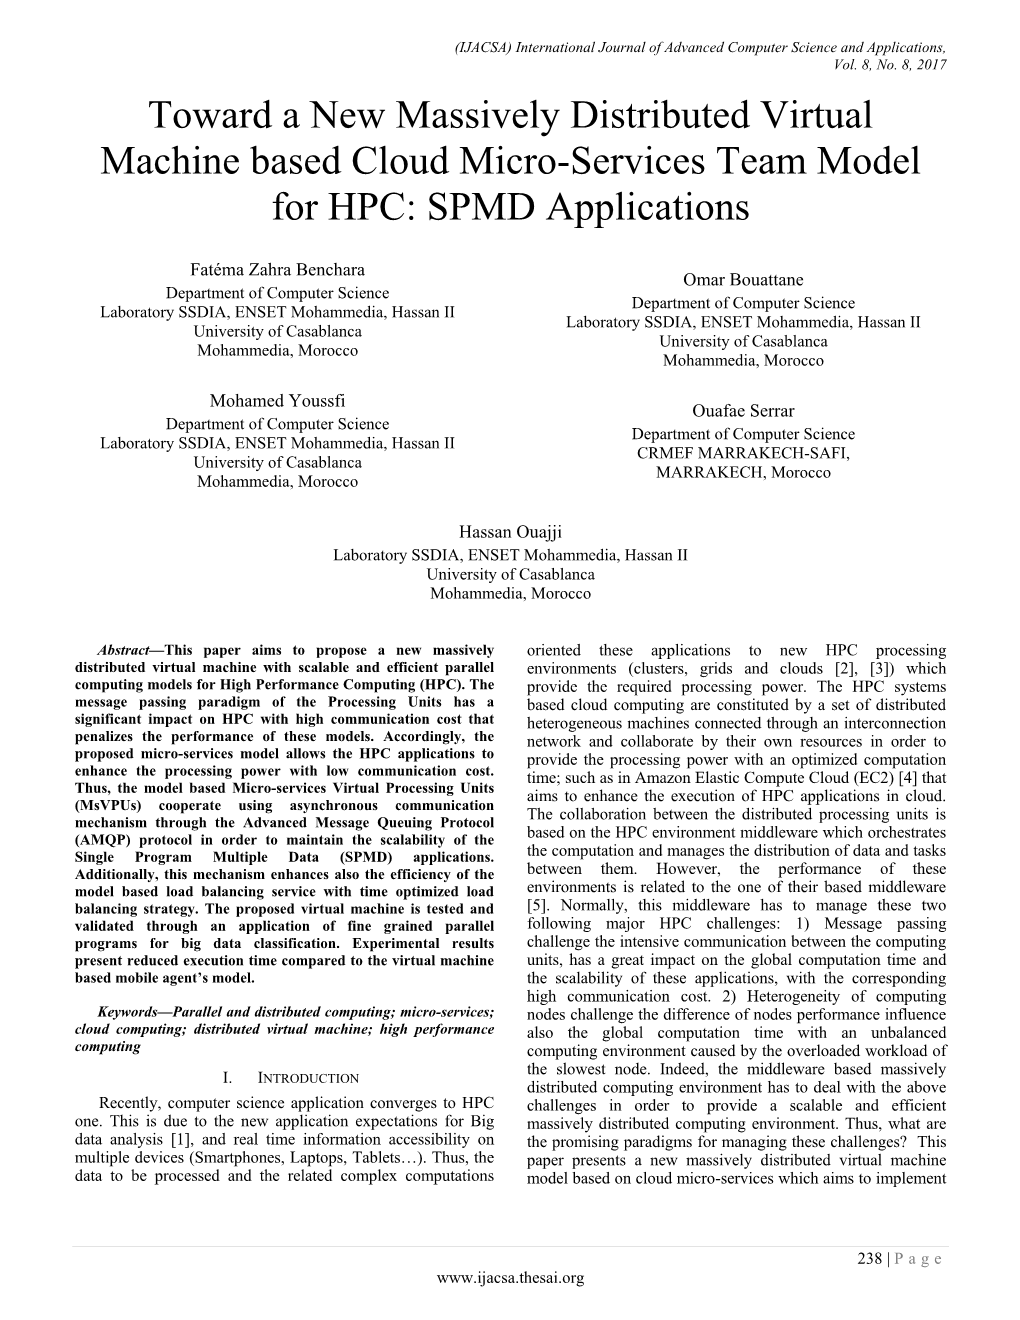 Toward a New Massively Distributed Virtual Machine Based Cloud Micro-Services Team Model for HPC: SPMD Applications